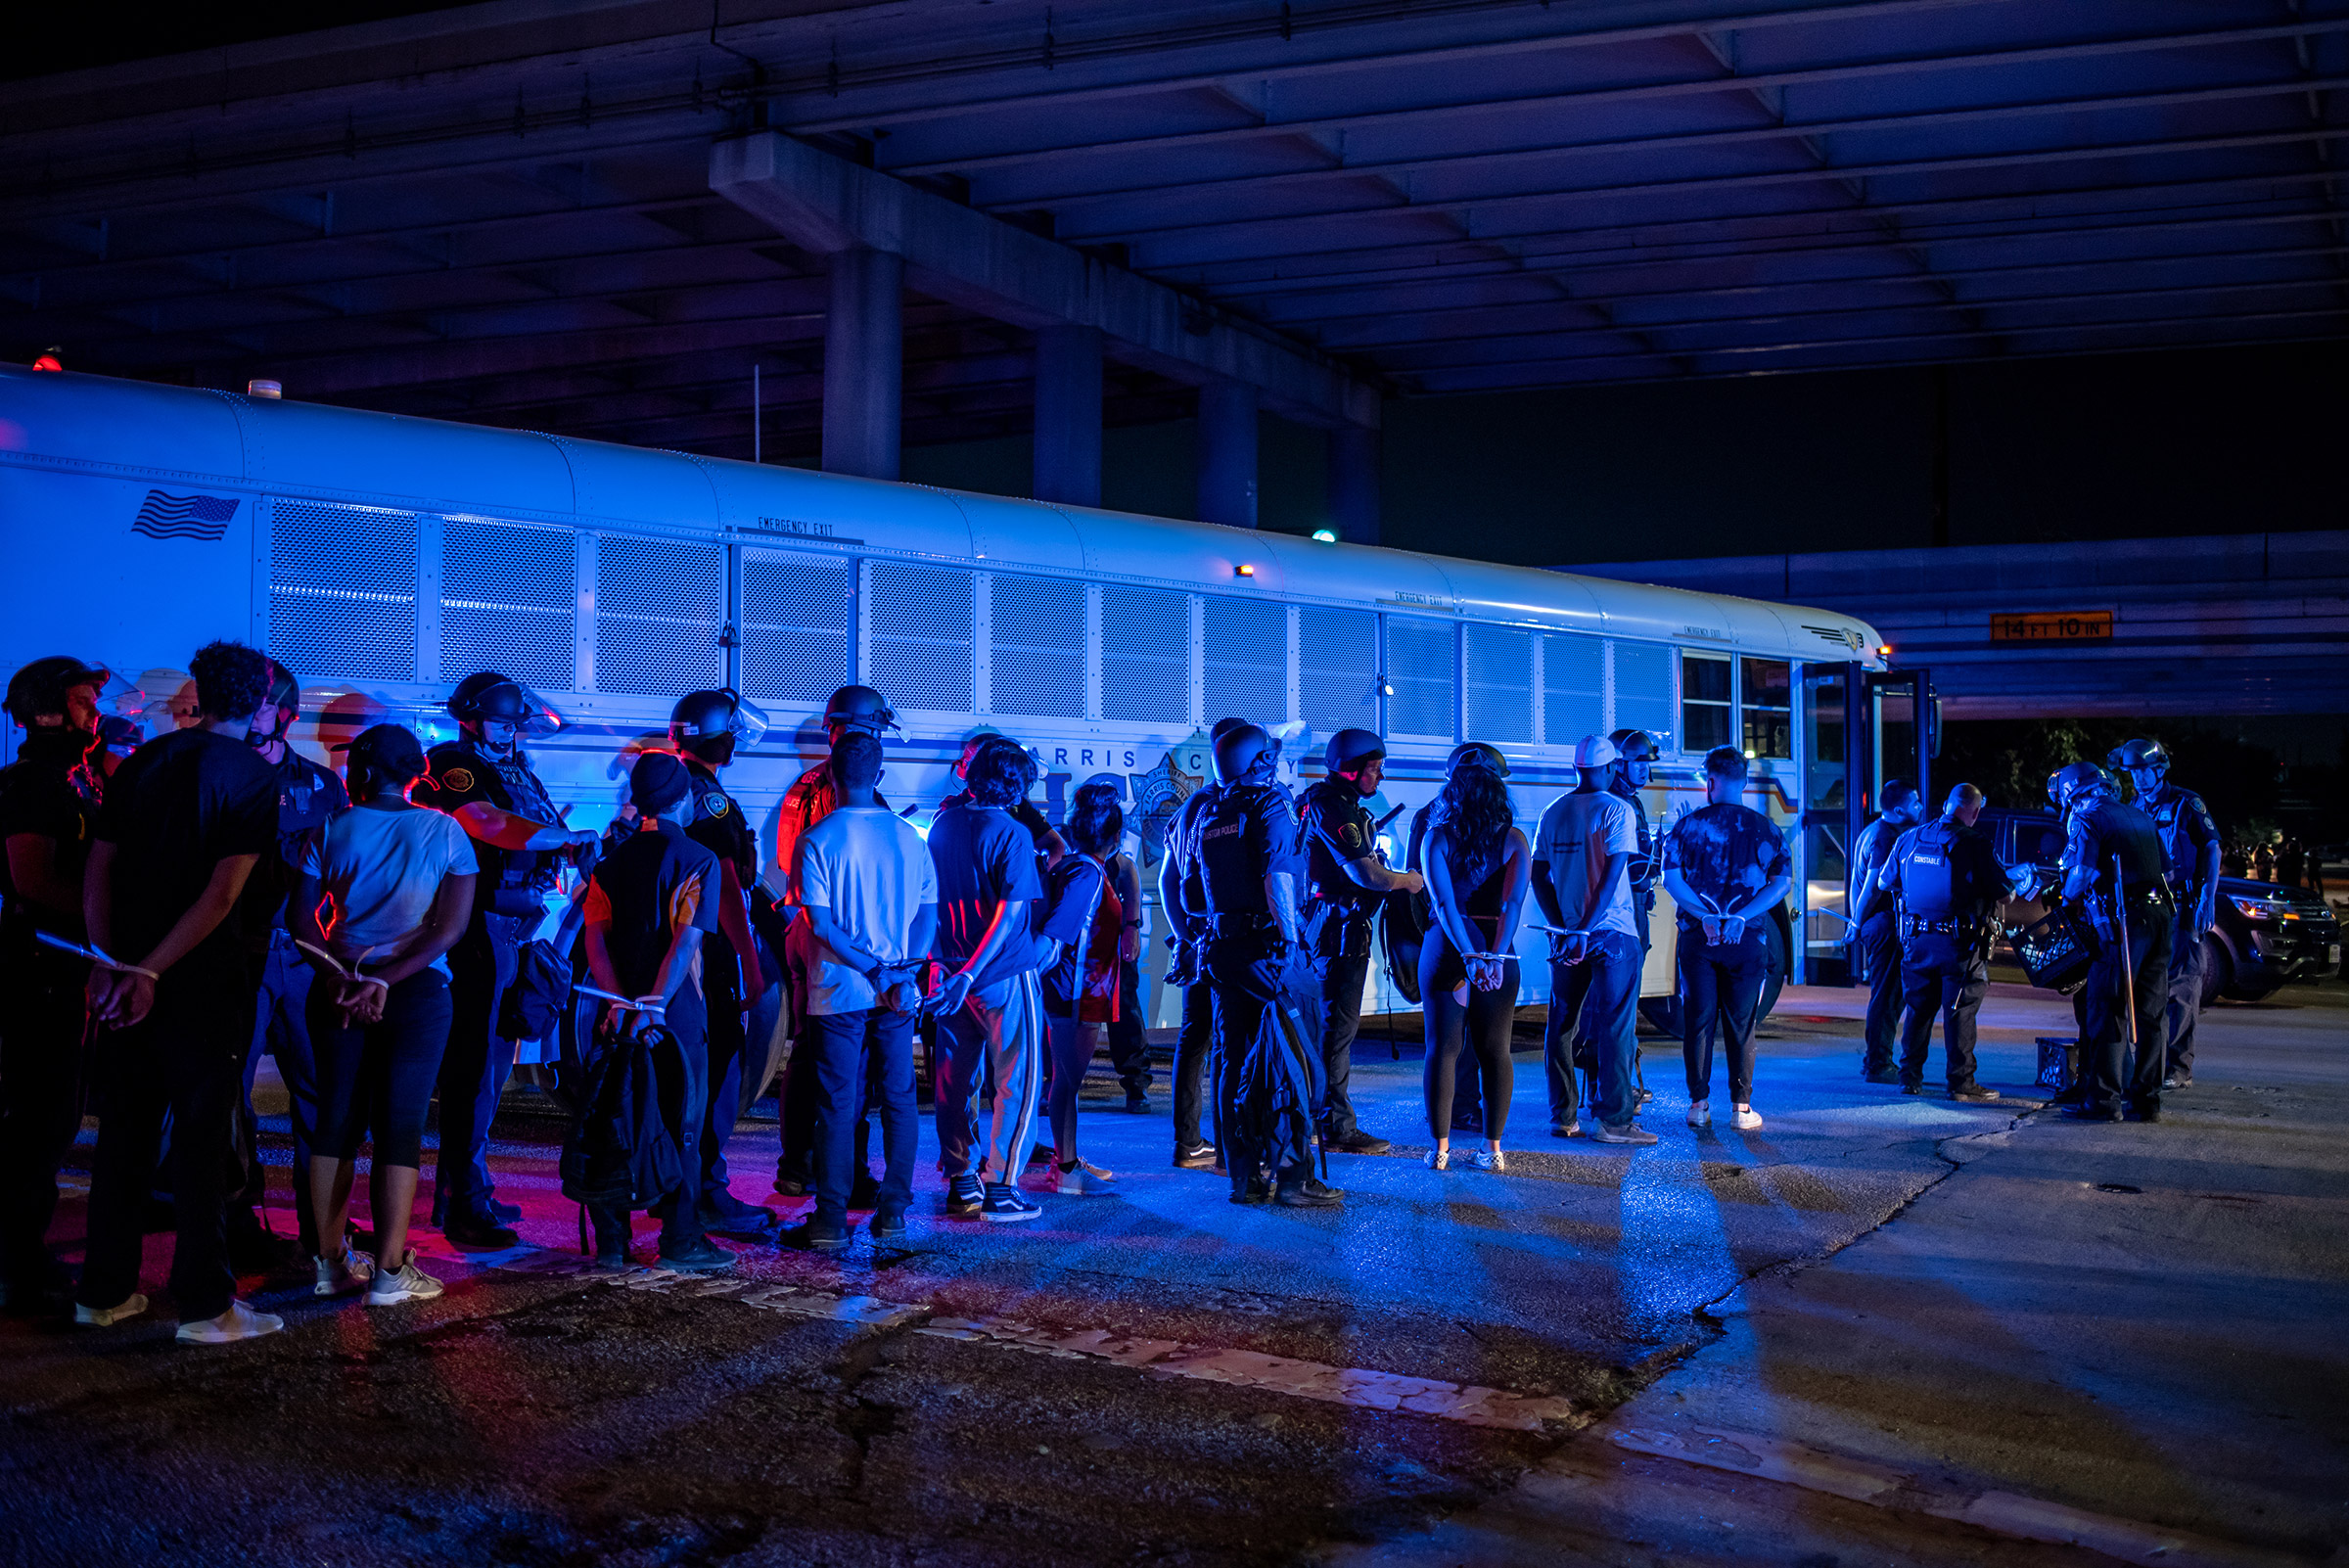 A group of people being placed under arrest stand by a Harris County Jail bus in Houston on June 2, 2020.